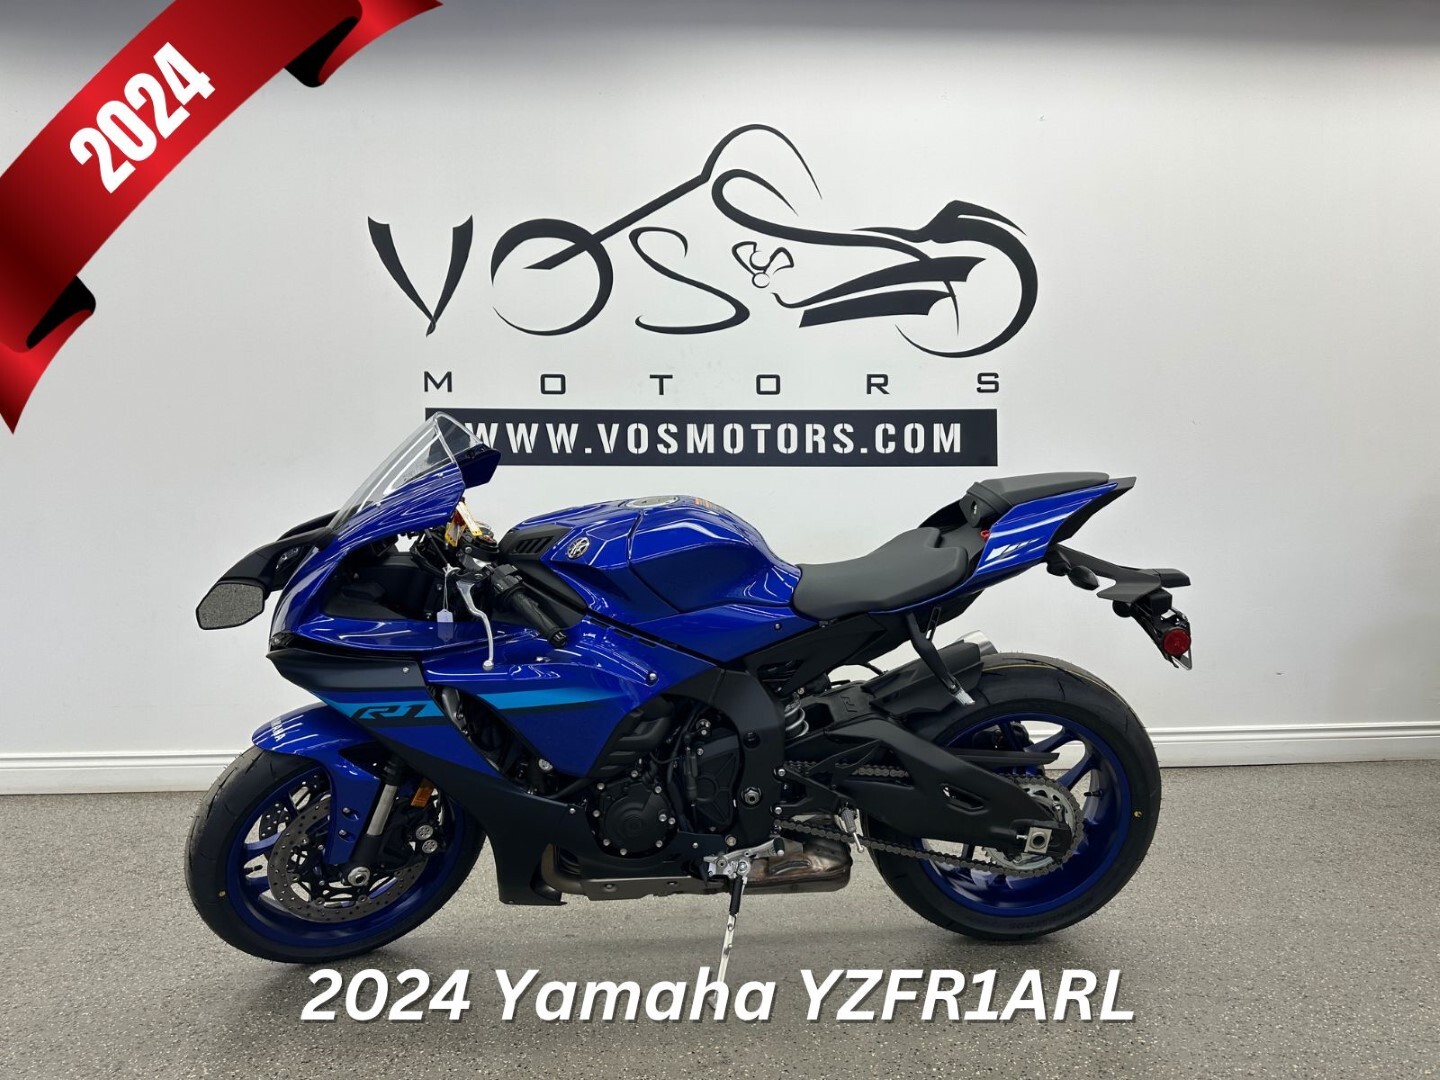 2024 Yamaha YZFR1ARL YZFR1ARL - V6025NP - -No Payments for 1 Year**